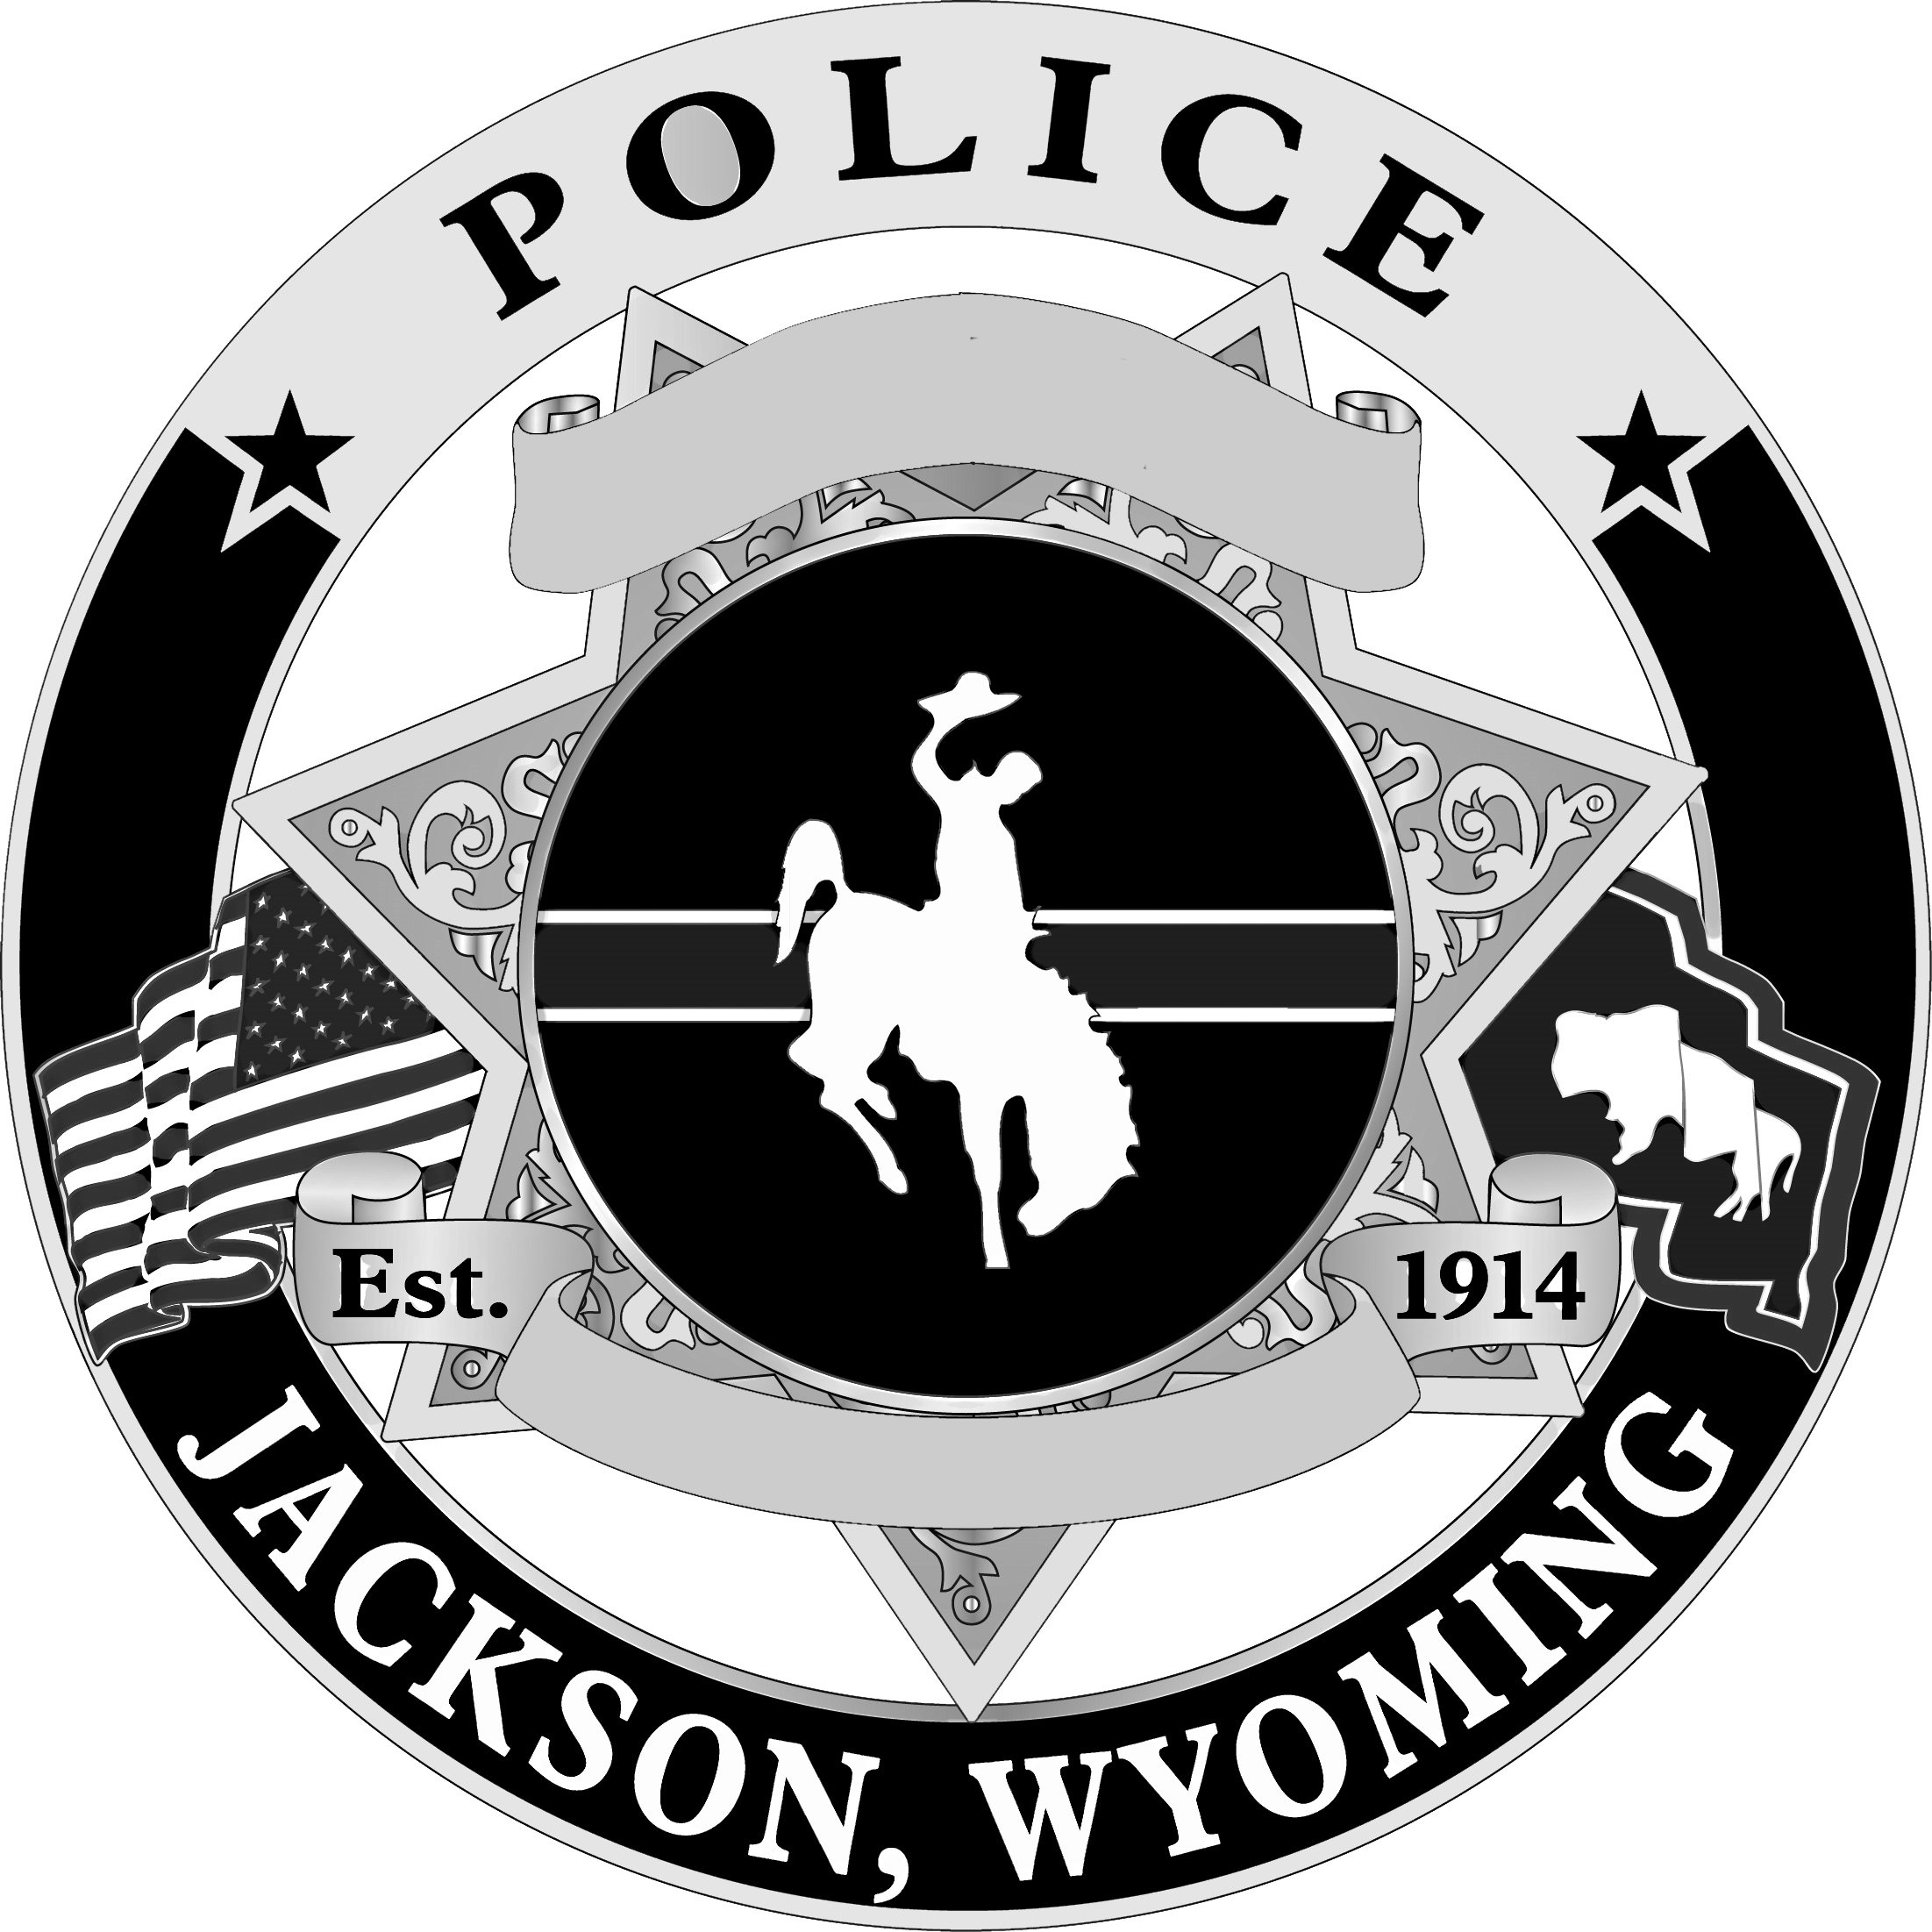 Jackson Police Department, WY Public Safety Jobs